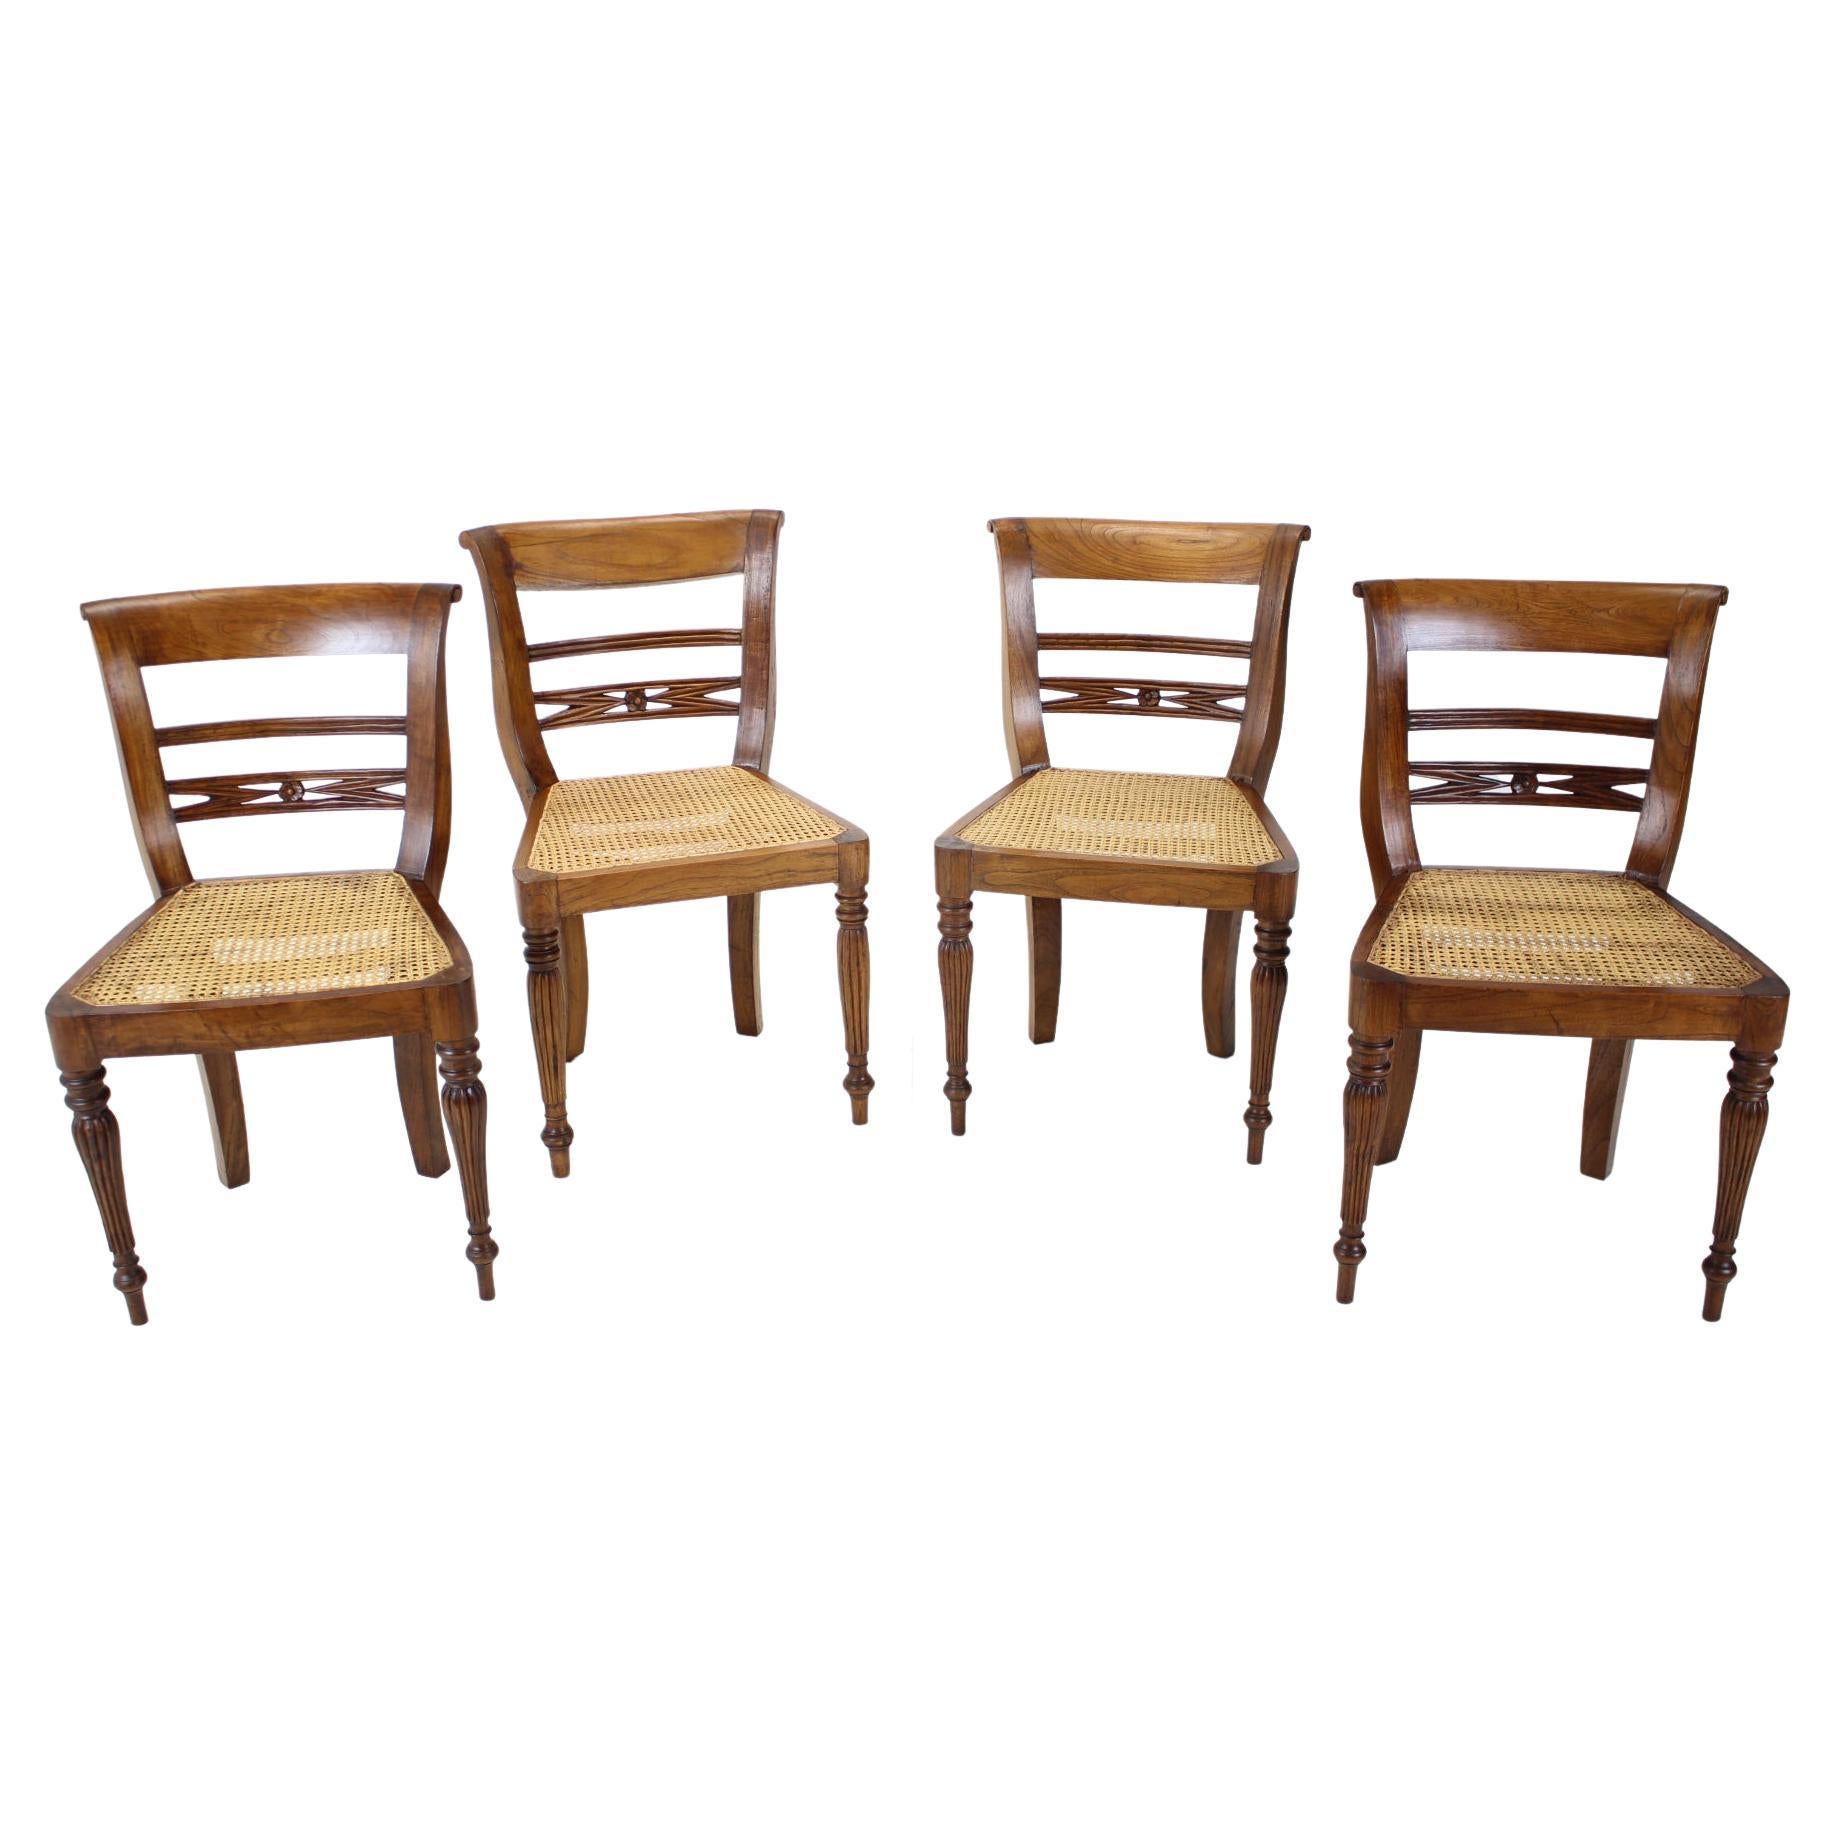 Set of Four Dining Chairs, Made of Solid Wood, 1950s, Czechoslovakia For Sale